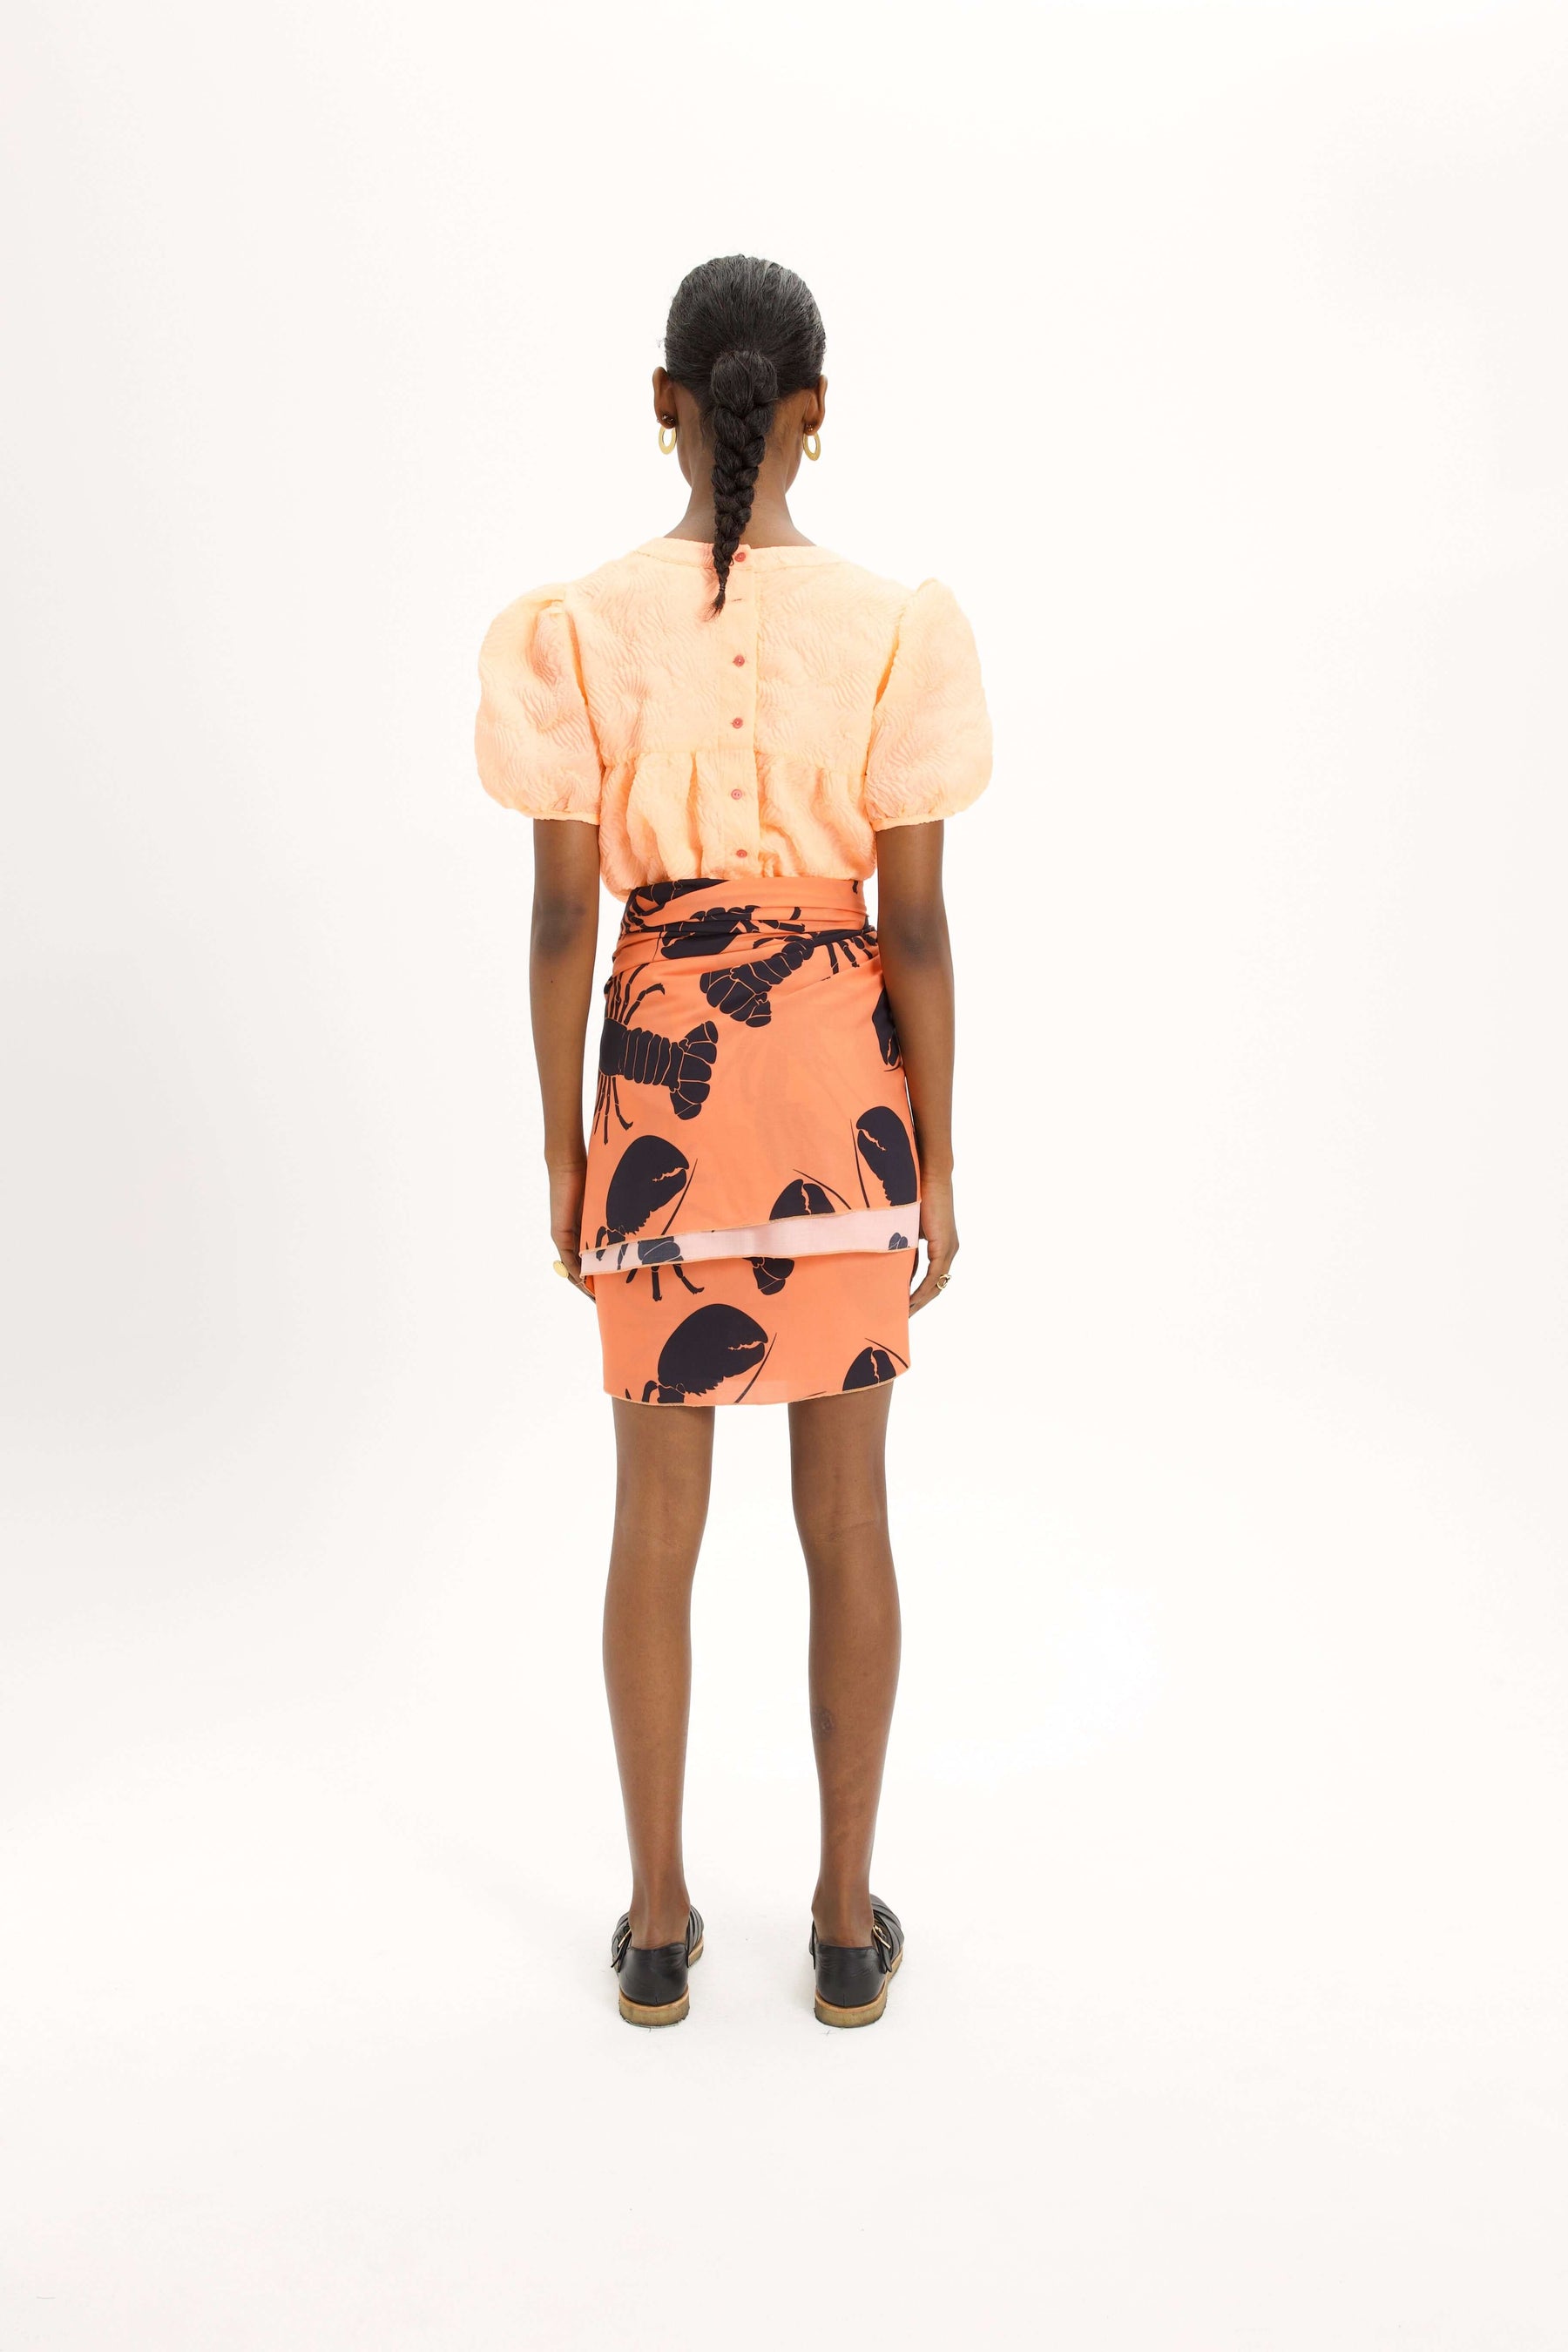 The Pareo-skirt, in 732 grams print